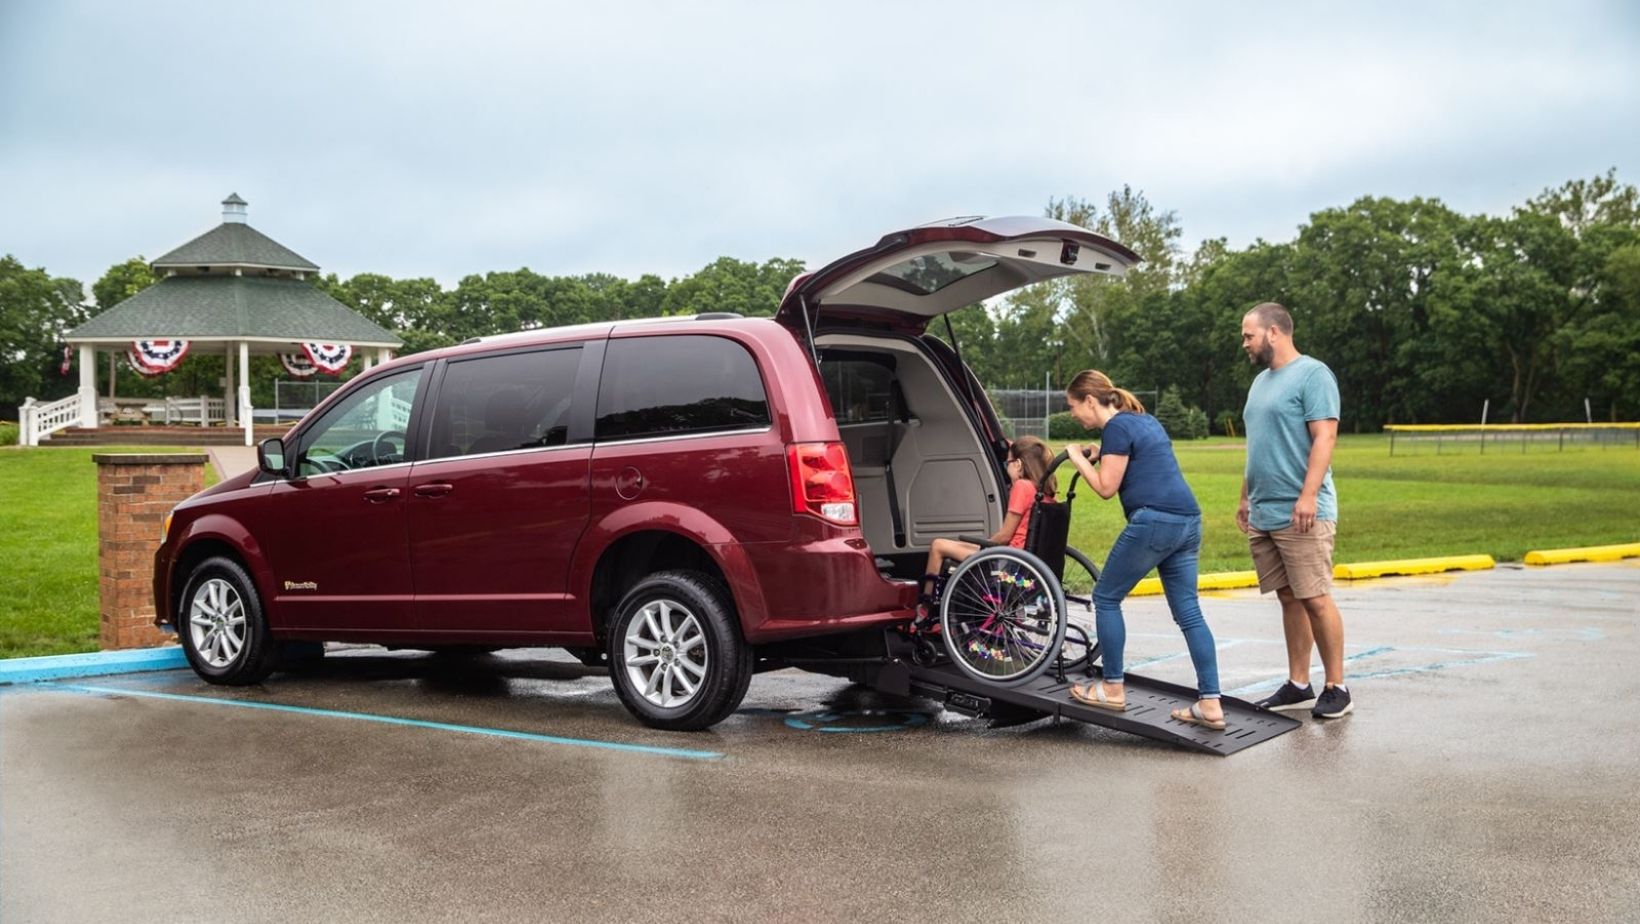 Lease a Wheelchair Accessible Van at Clock Mobility